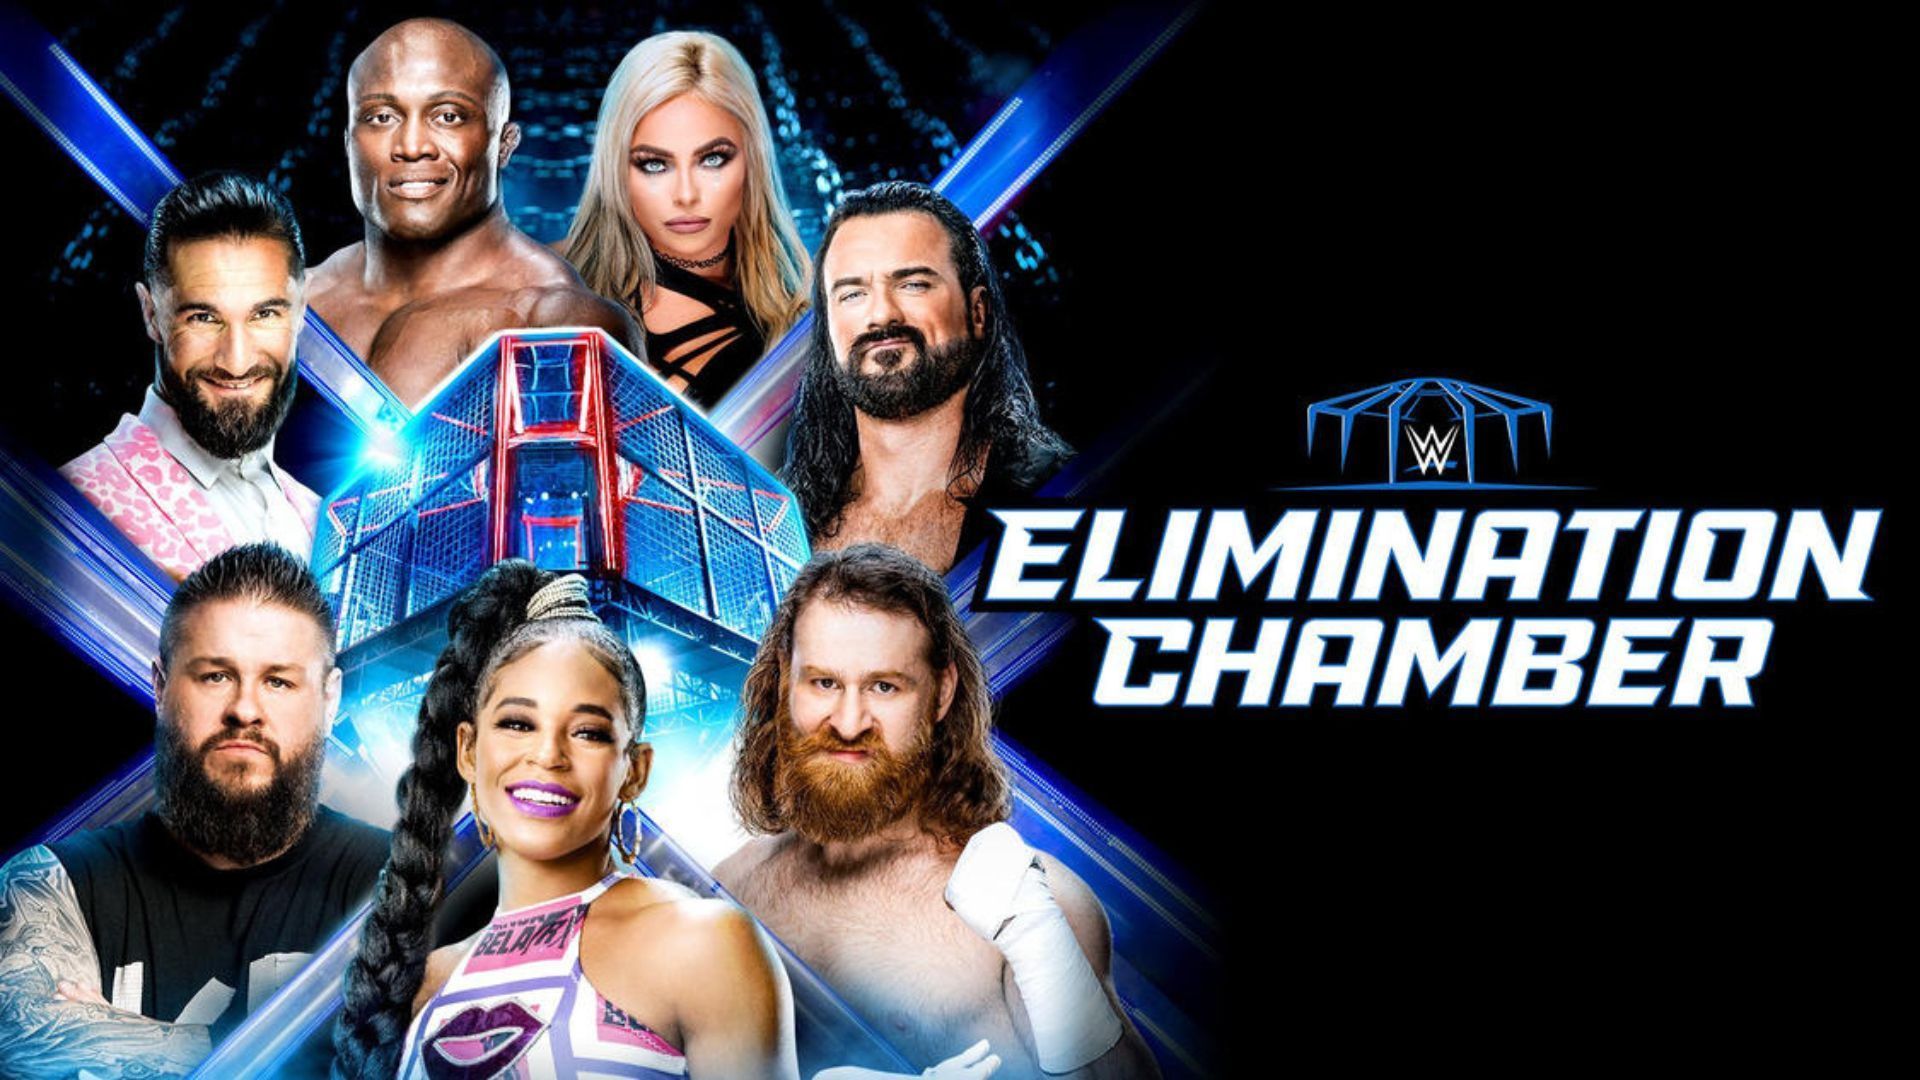 Elimination Chamber is expected to be a massive show.